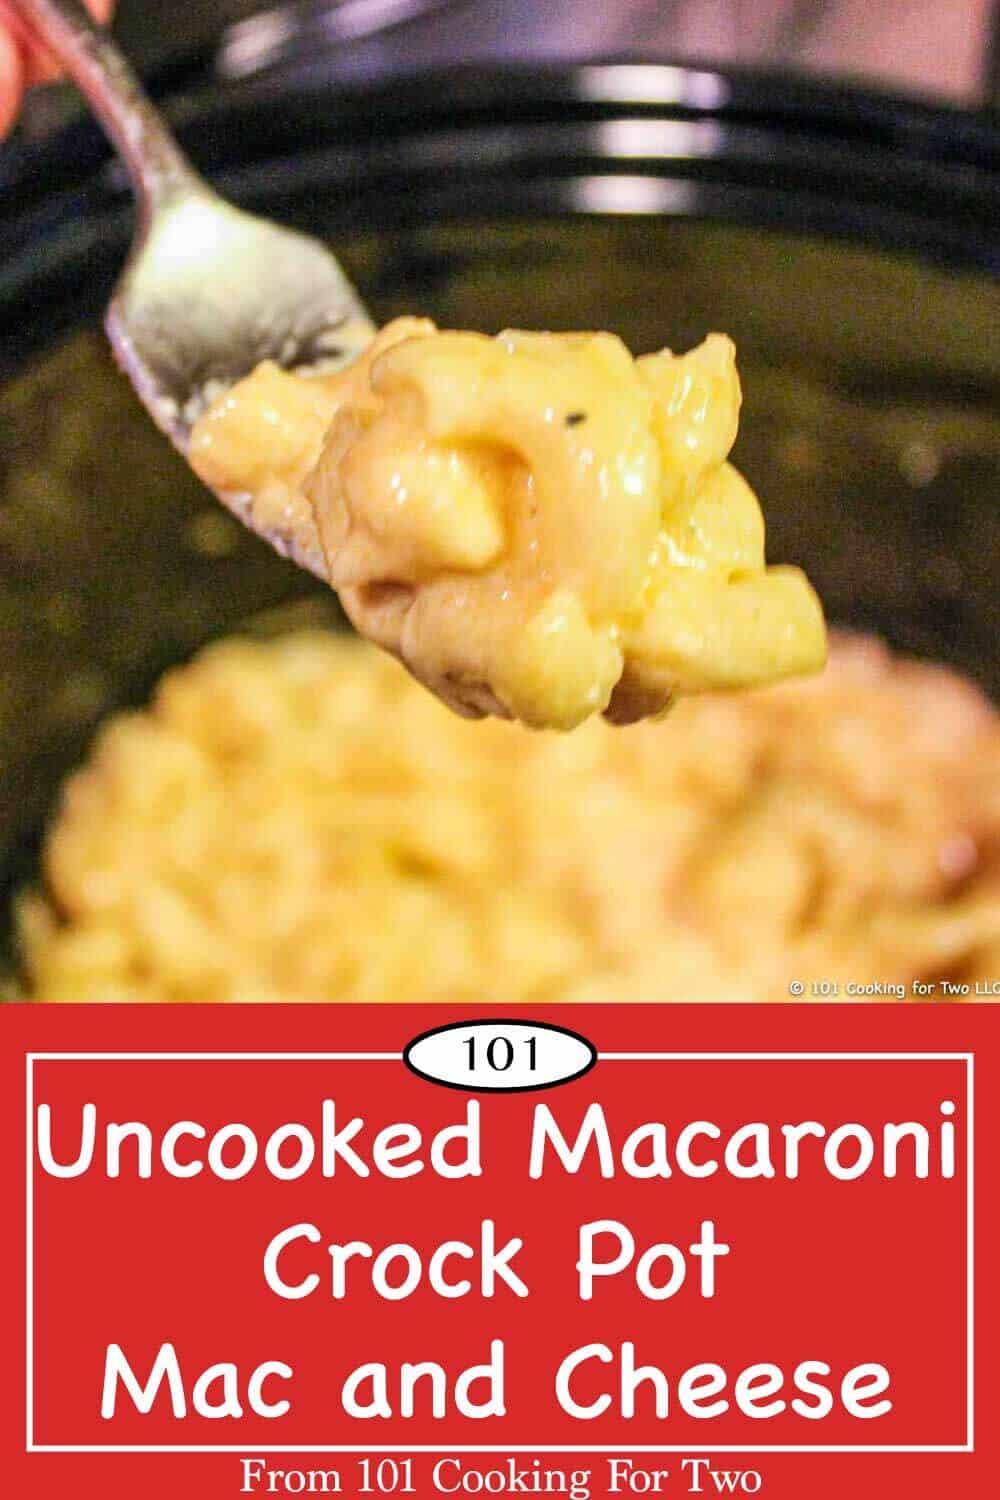 Uncooked Macaroni Crock Pot Mac and Cheese - 101 Cooking For Two